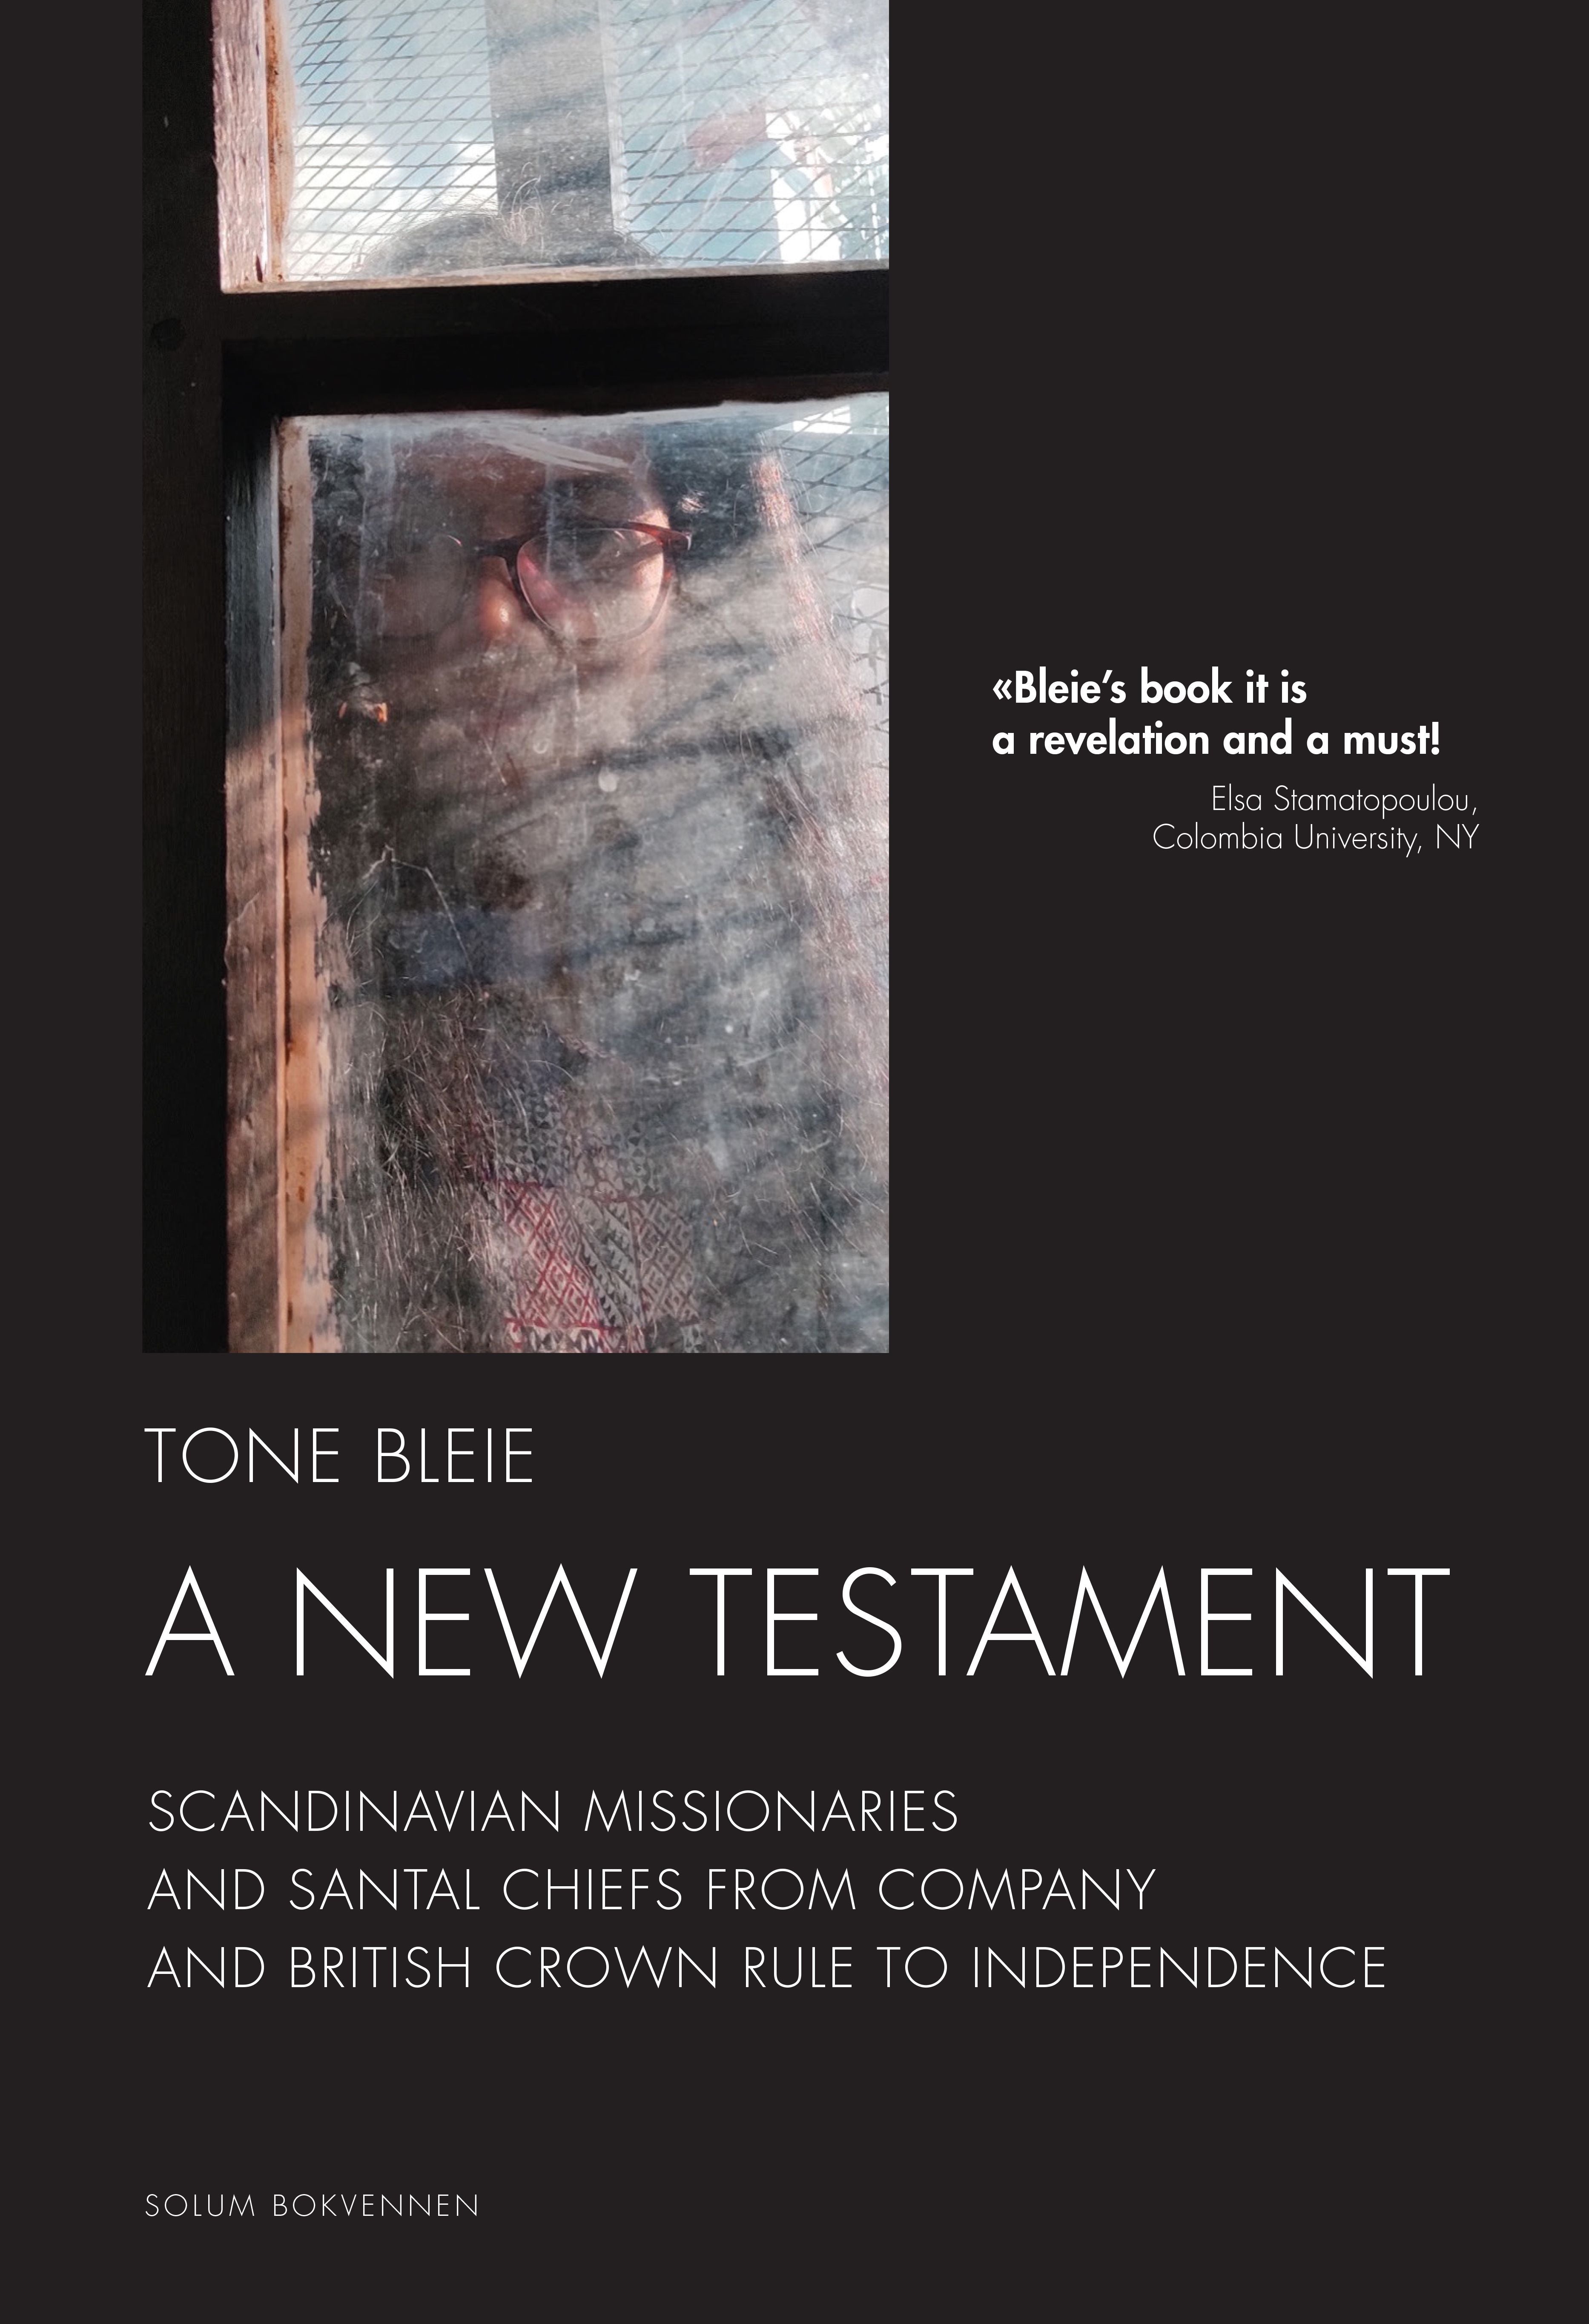 A new testament: Scandinavian missionaries and Santal chiefs from